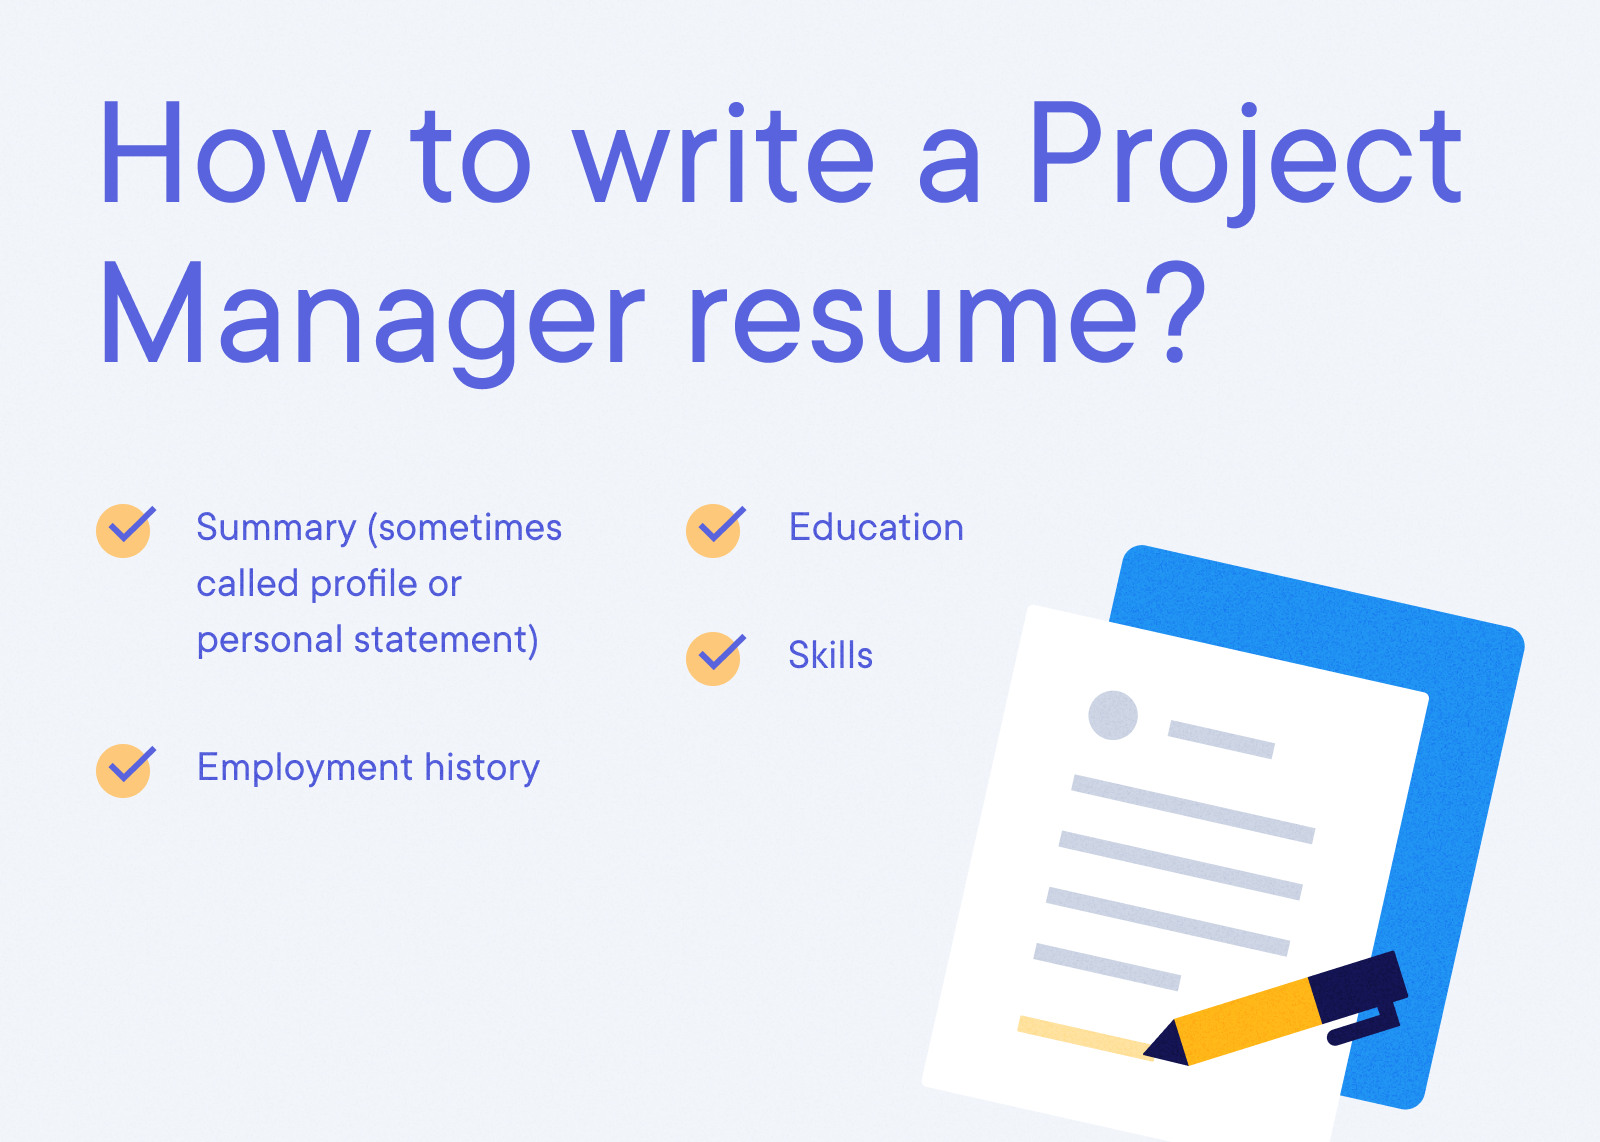 Project Manager Resume Example - How to write a Project Manager resume?